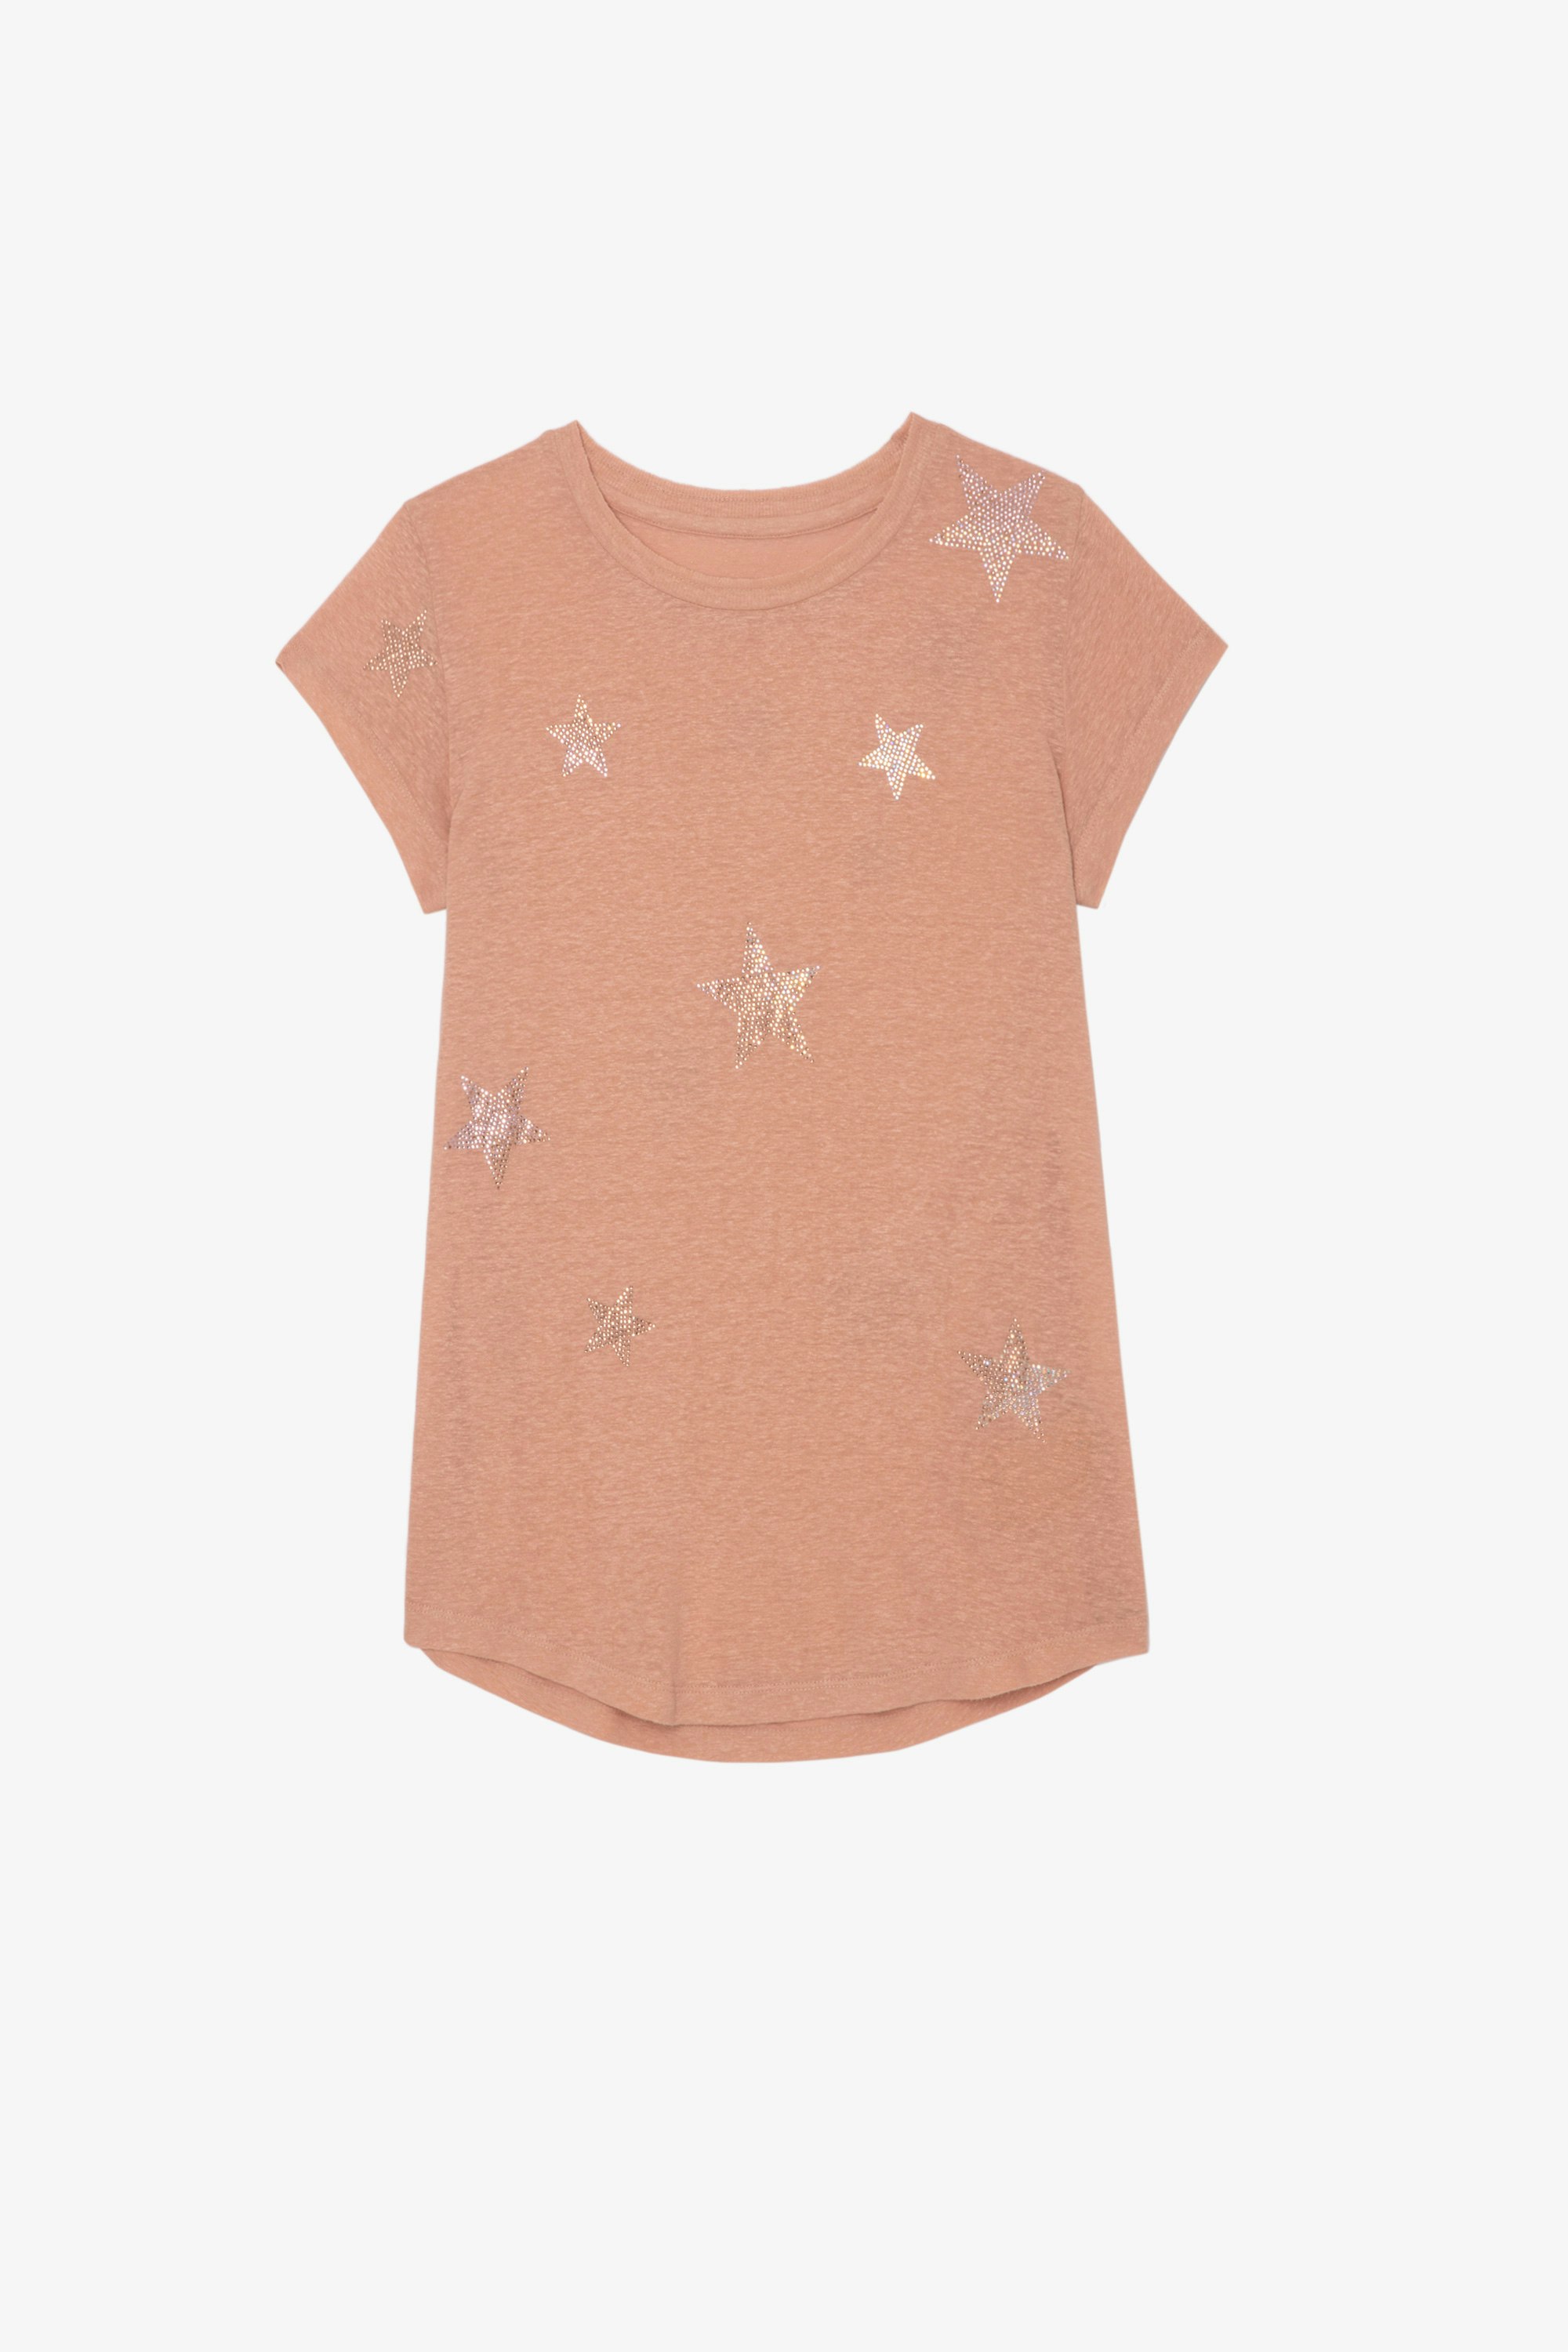 Skinny Stars Diamanté T-Shirt Women’s pink cotton T-shirt with short sleeves and ZV wings motif on the back